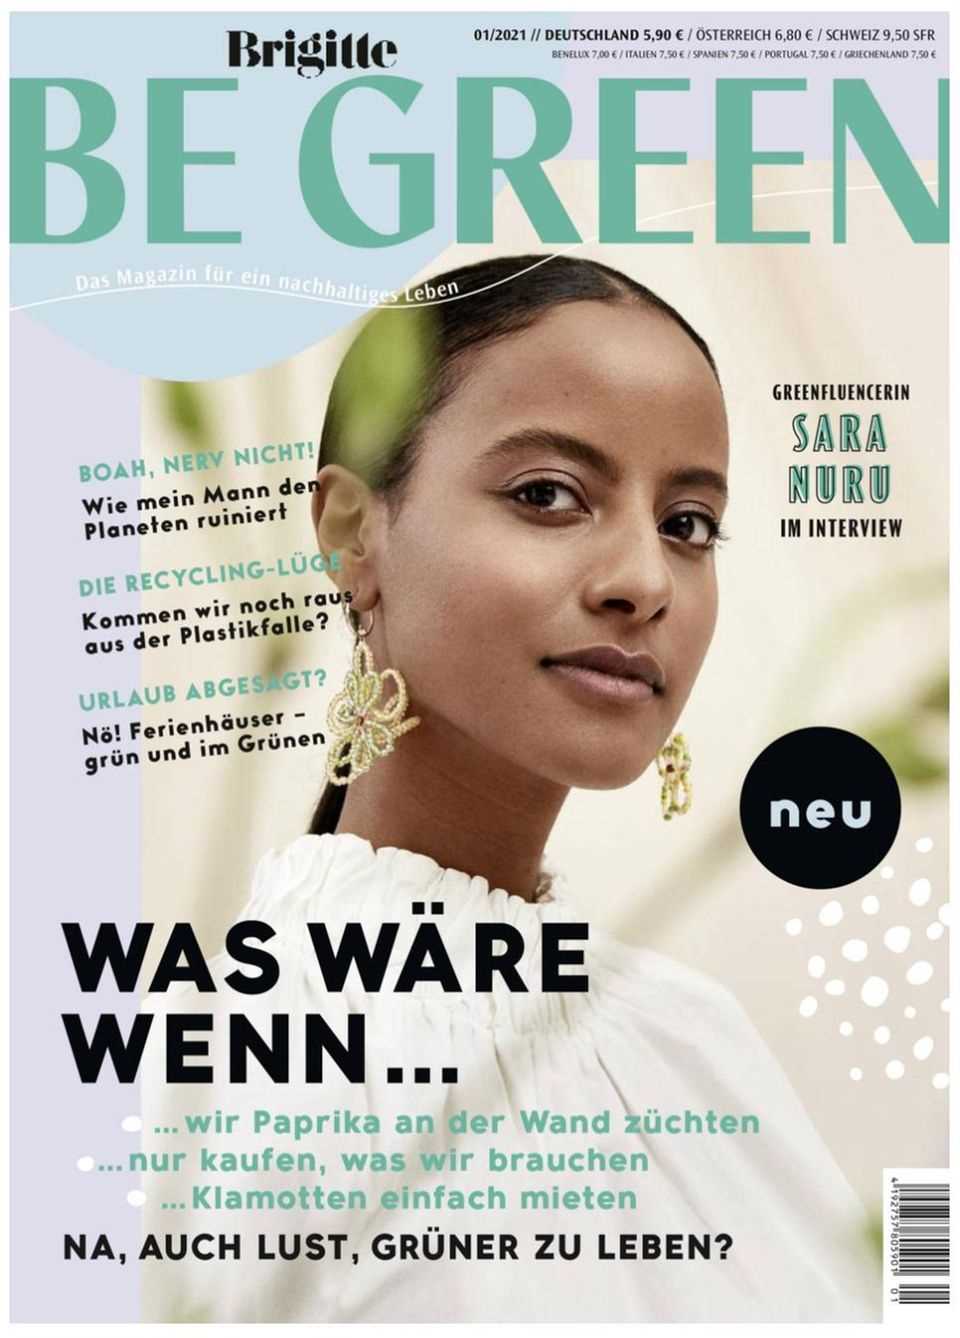 BE GREEN, BRIGITTE's new sustainability magazine for women who are interested in social, contemporary and, above all, environmental issues and who are looking for ways to bring their own life even more in harmony with nature.